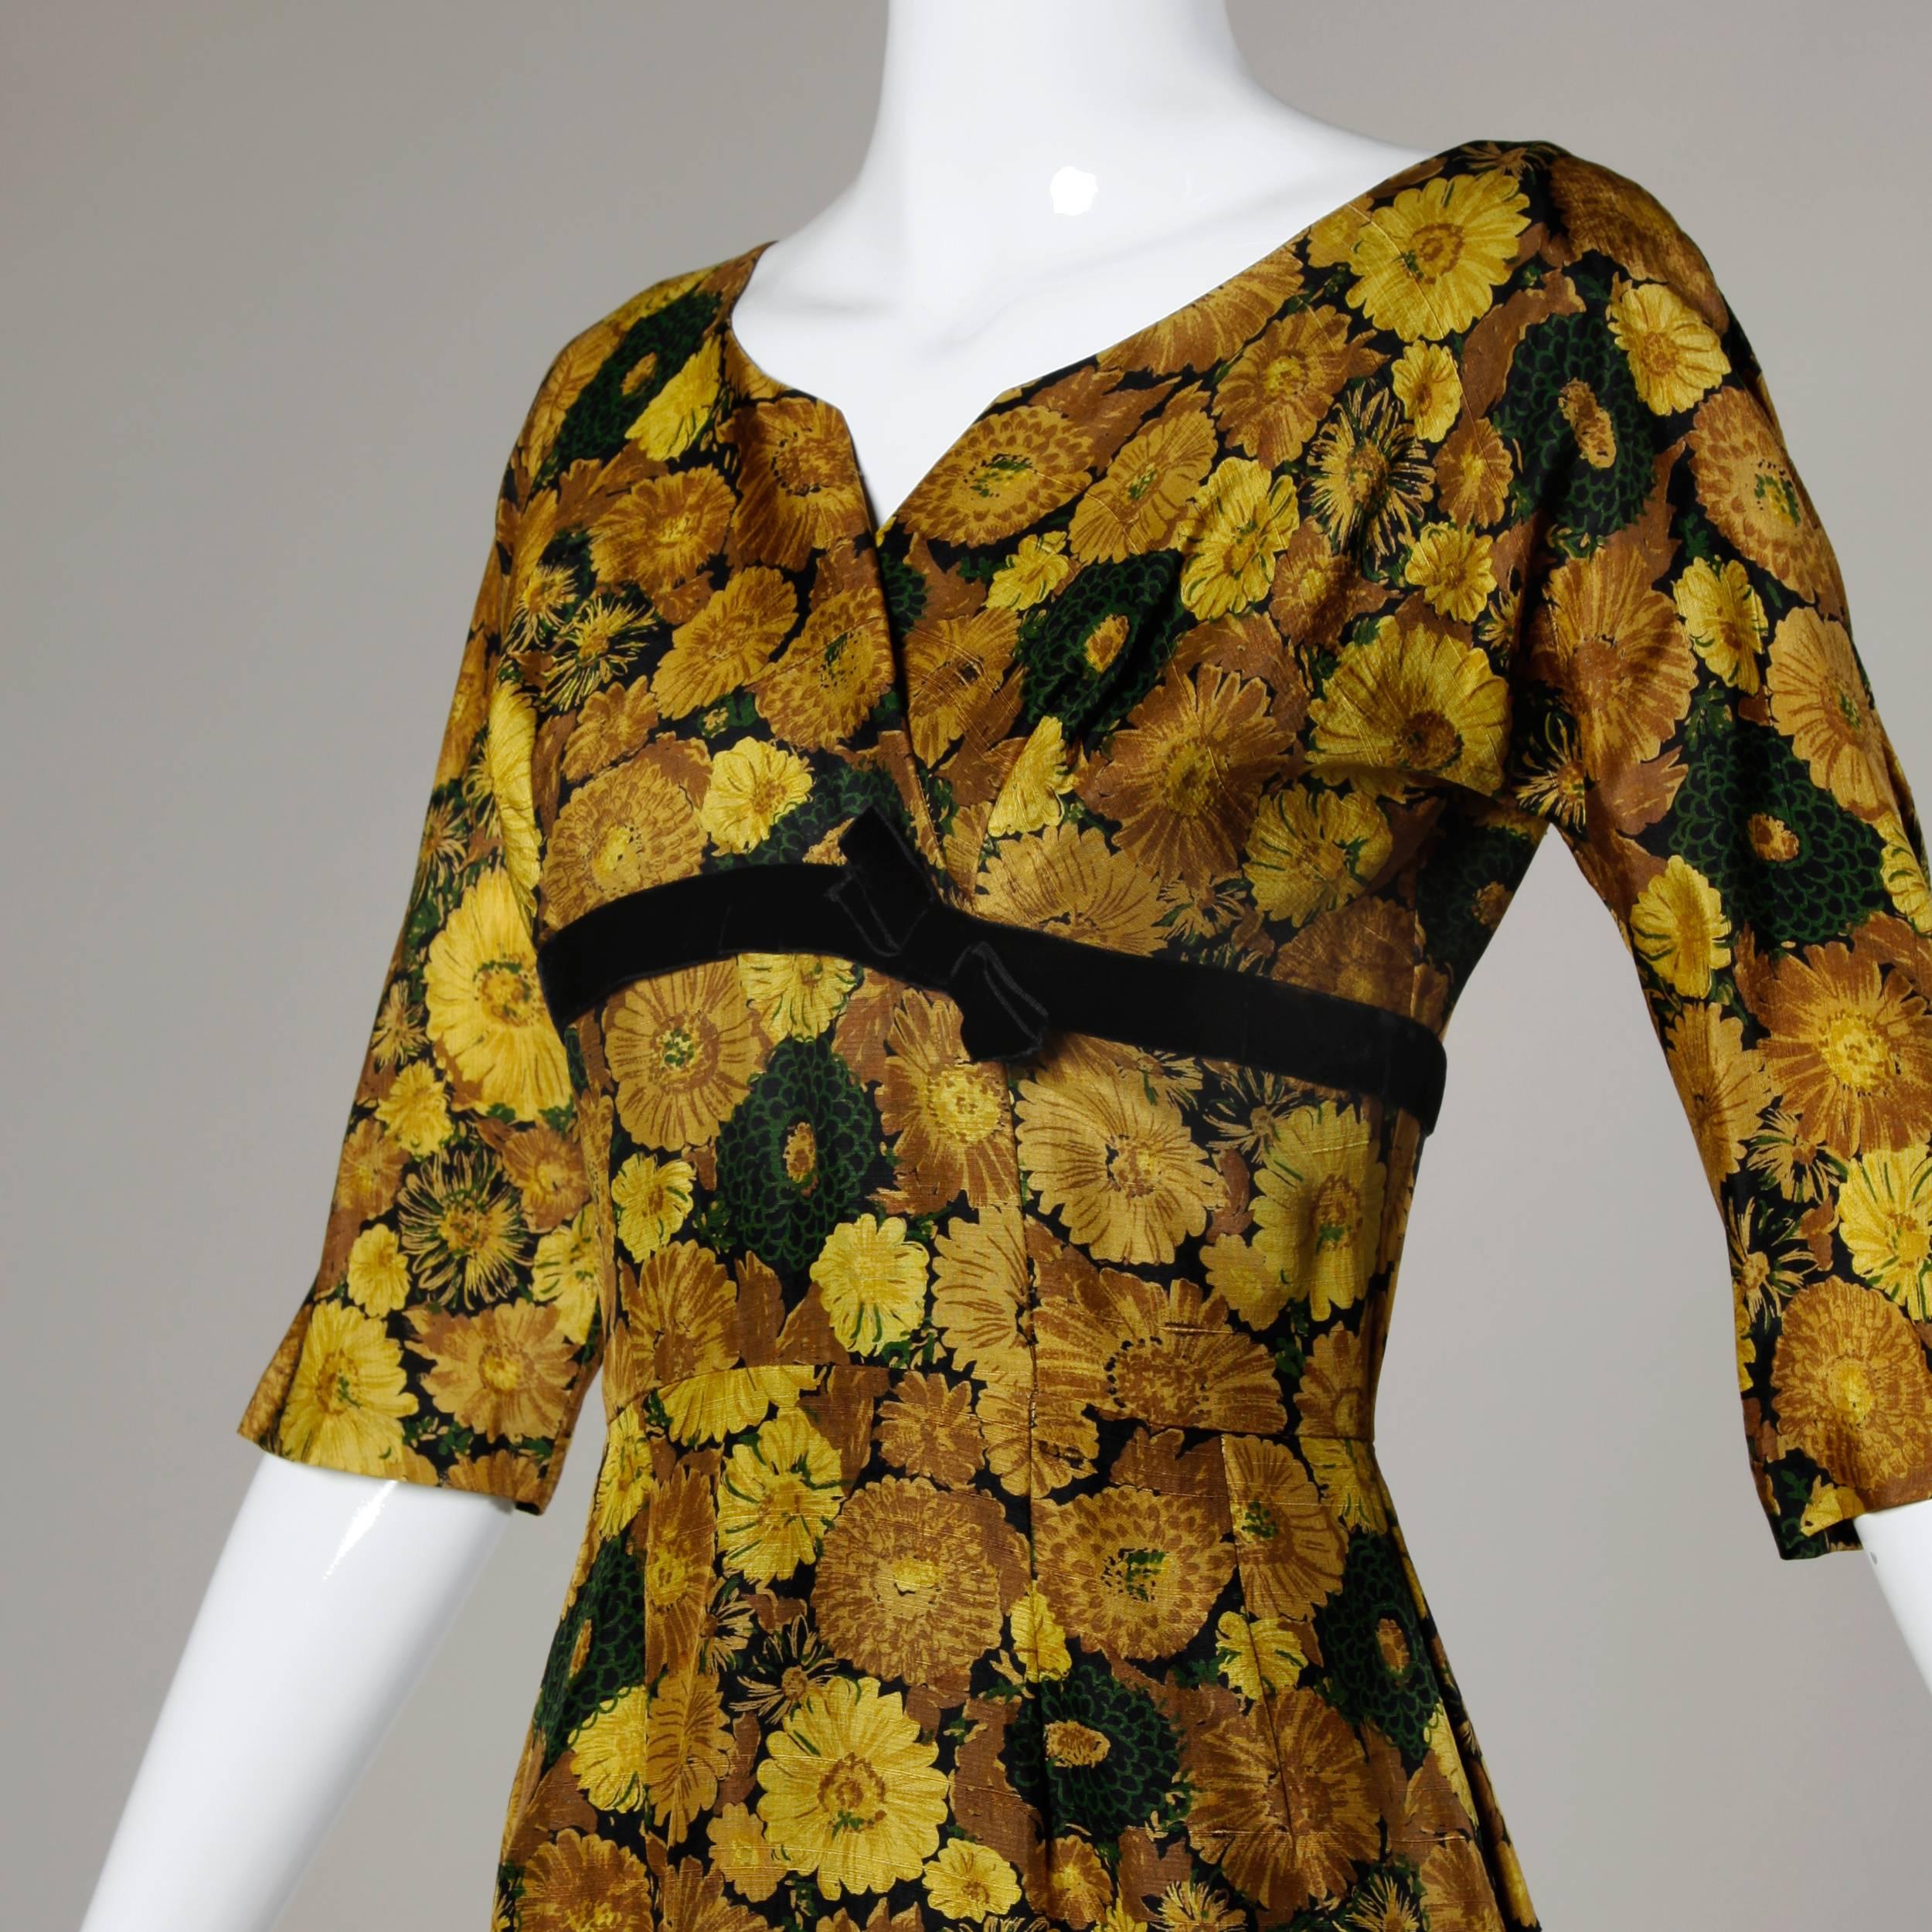 Elegant 1950s-1960s vintage floral printed silk cocktail dress with 3/4 length sleeves and hourglass silhouette. Fully lined with back metal zip and hook closure. Fits like a modern size small. The measurements are as follows: Bust: 36